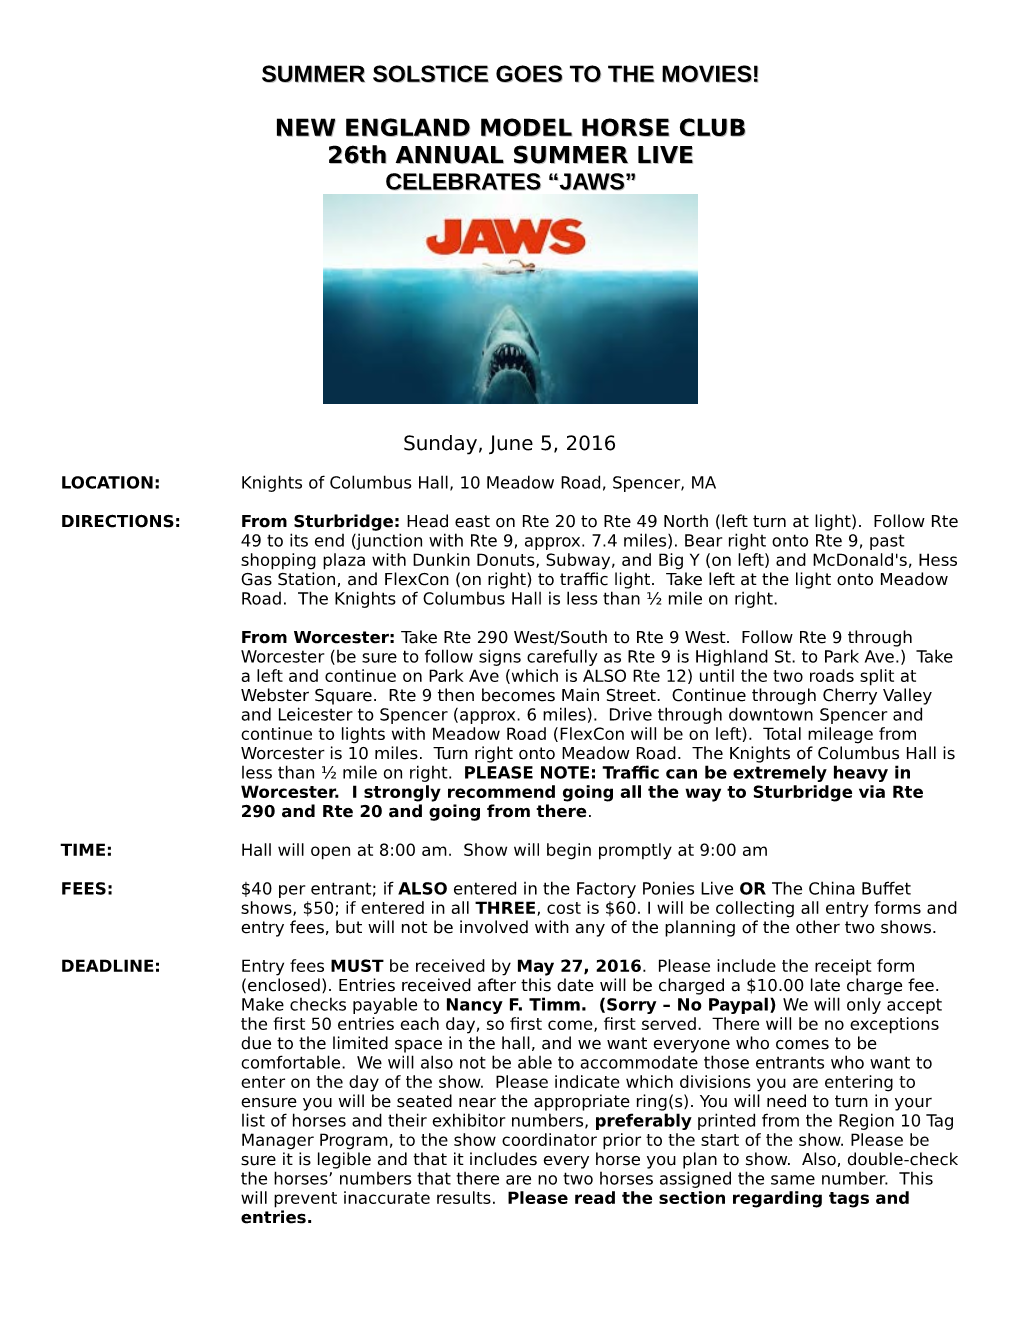 NEW ENGLAND MODEL HORSE CLUB 26Th ANNUAL SUMMER LIVE CELEBRATES “JAWS”